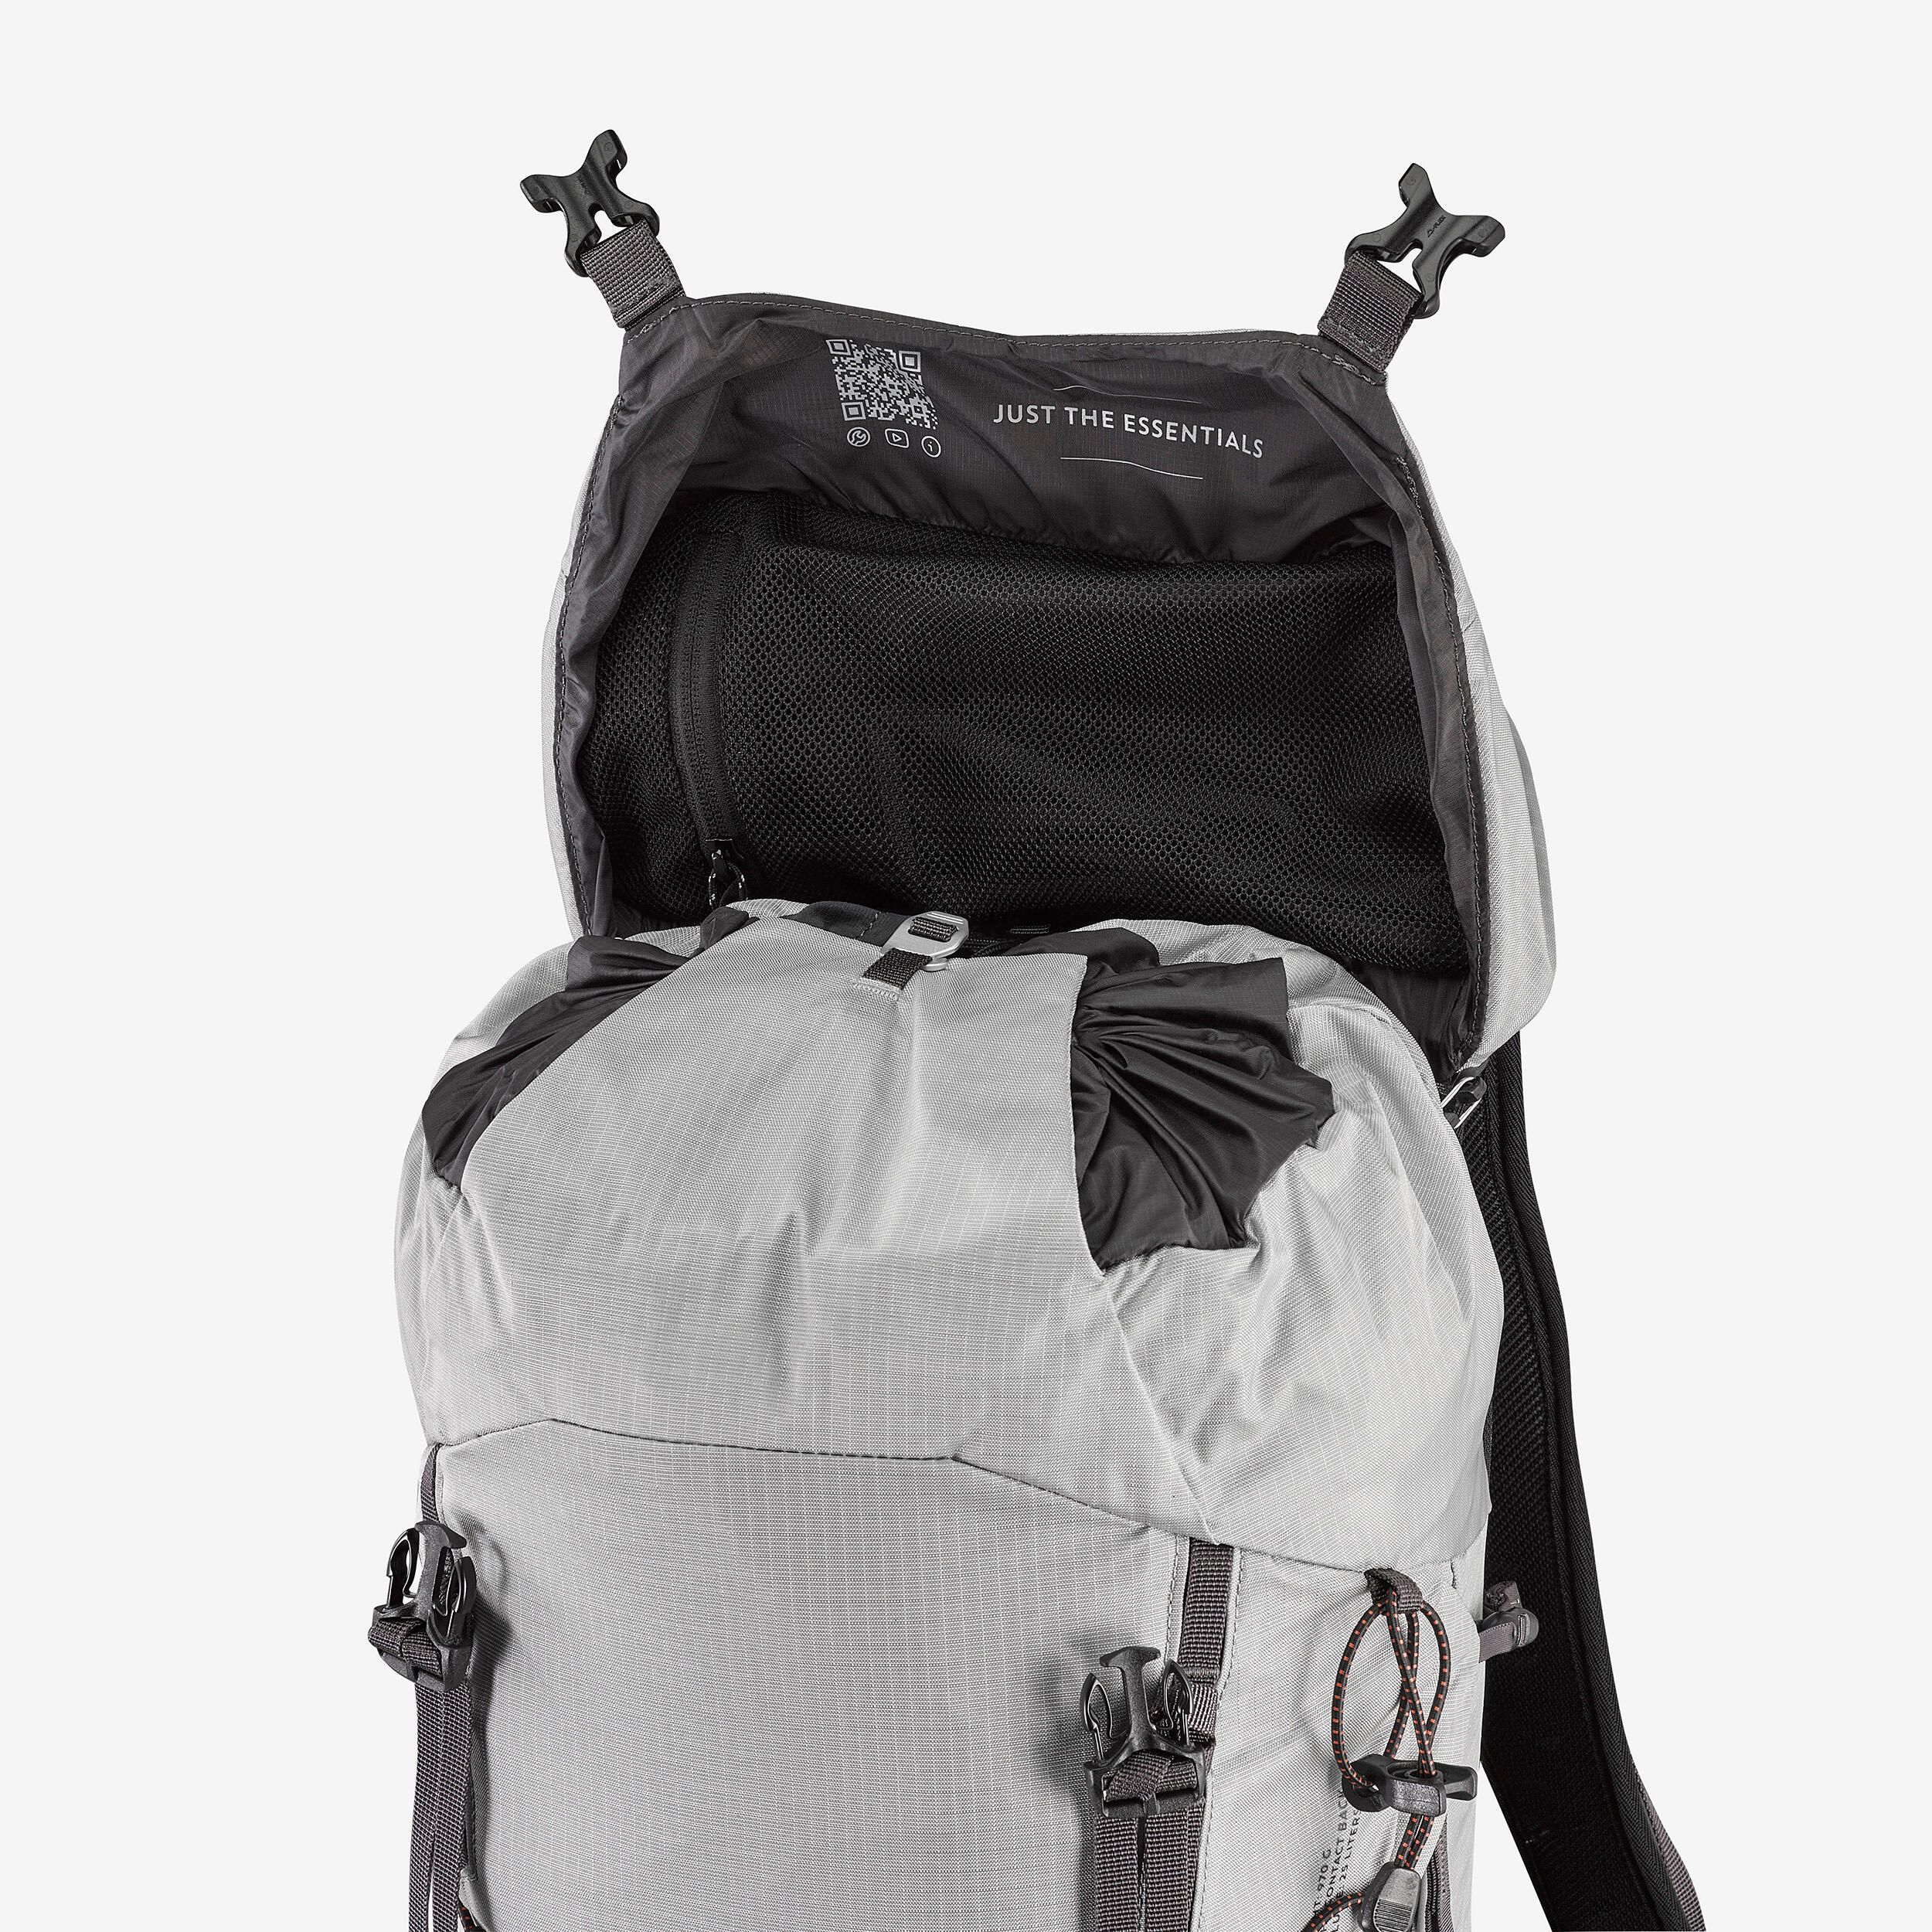 Mountain hiking backpack 25L - MH900 14/18